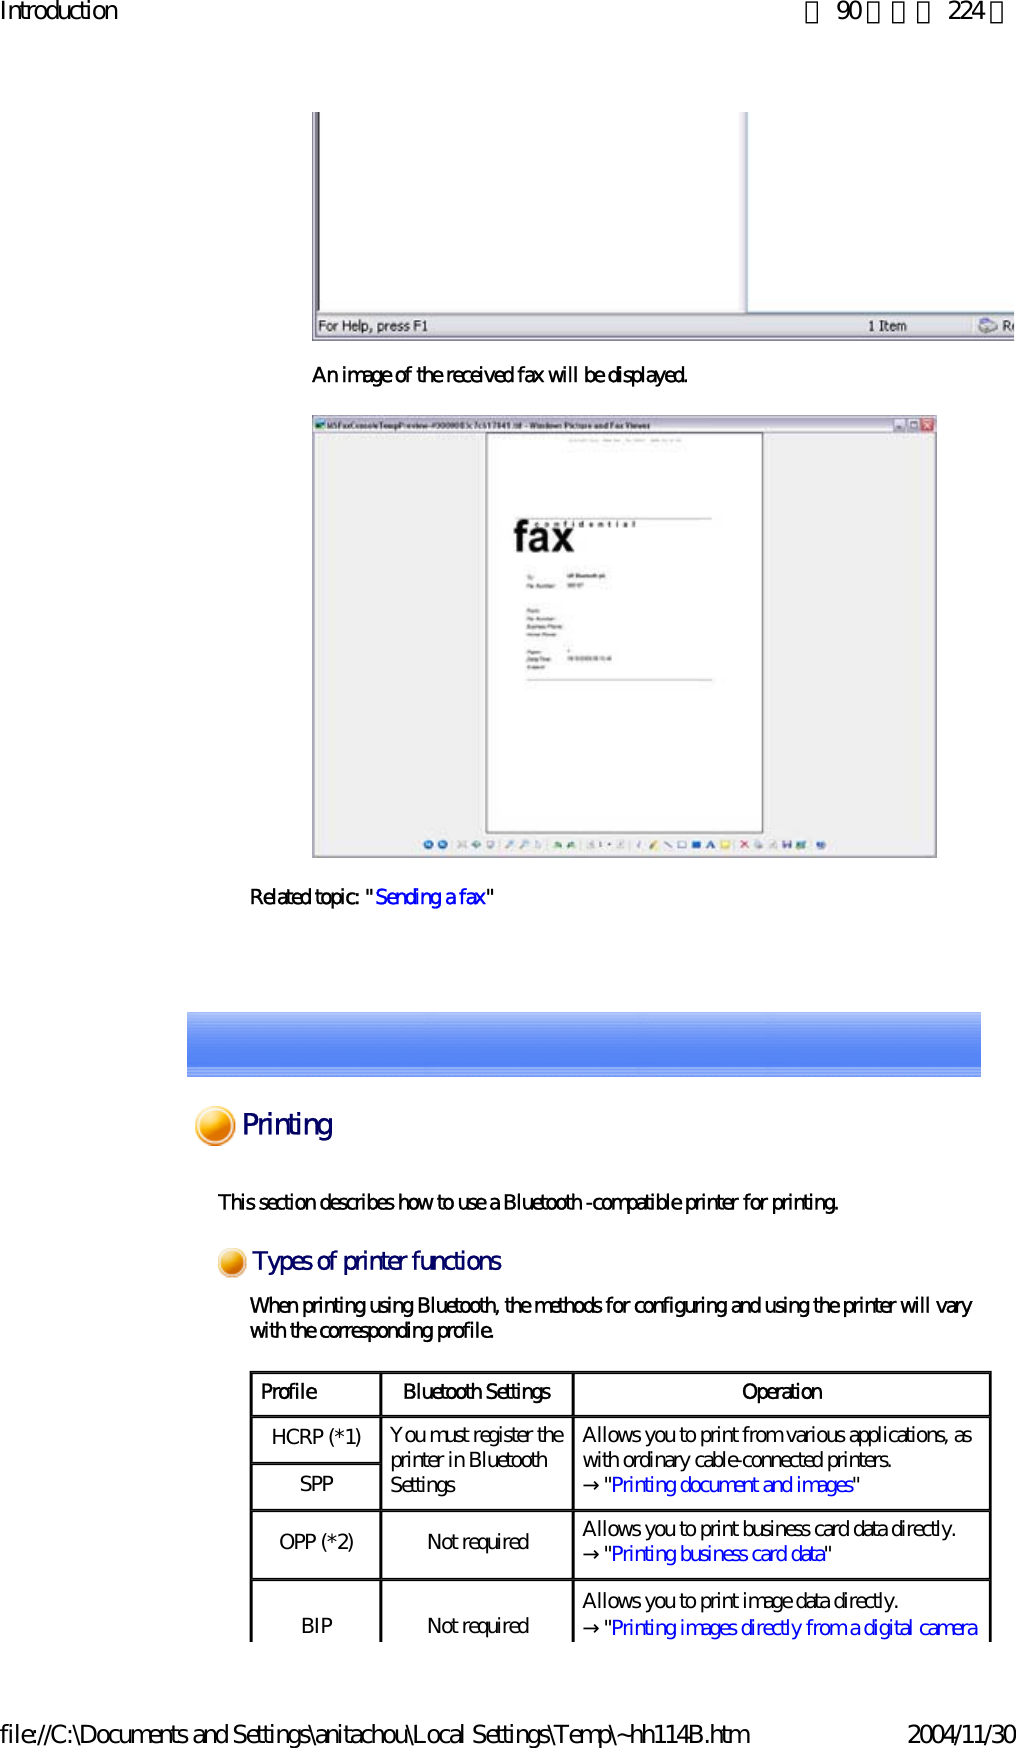 Introduction 第 90 頁，共 224 頁file://C:\Documents and Settings\anitachou\Local Settings\Temp\~hh114B.htm 2004/11/30 An image of the received fax will be displayed.Related topic: &quot;Sending a fax&quot;This section describes how to use a Bluetooth -compatible printer for printing.When printing using Bluetooth, the methods for configuring and using the printer will vary with the corresponding profile.Types of printer functionsProfile Bluetooth Settings OperationHCRP (*1) You must register the printer in Bluetooth SettingsAllows you to print from various applications, as with ordinary cable-connected printers.→&quot;Printing document and images&quot;SPPOPP (*2) Not required Allows you to print business card data directly.→&quot;Printing business card data&quot;BIP Not required Allows you to print image data directly. →&quot;Printing images directly from a digital camera Printing